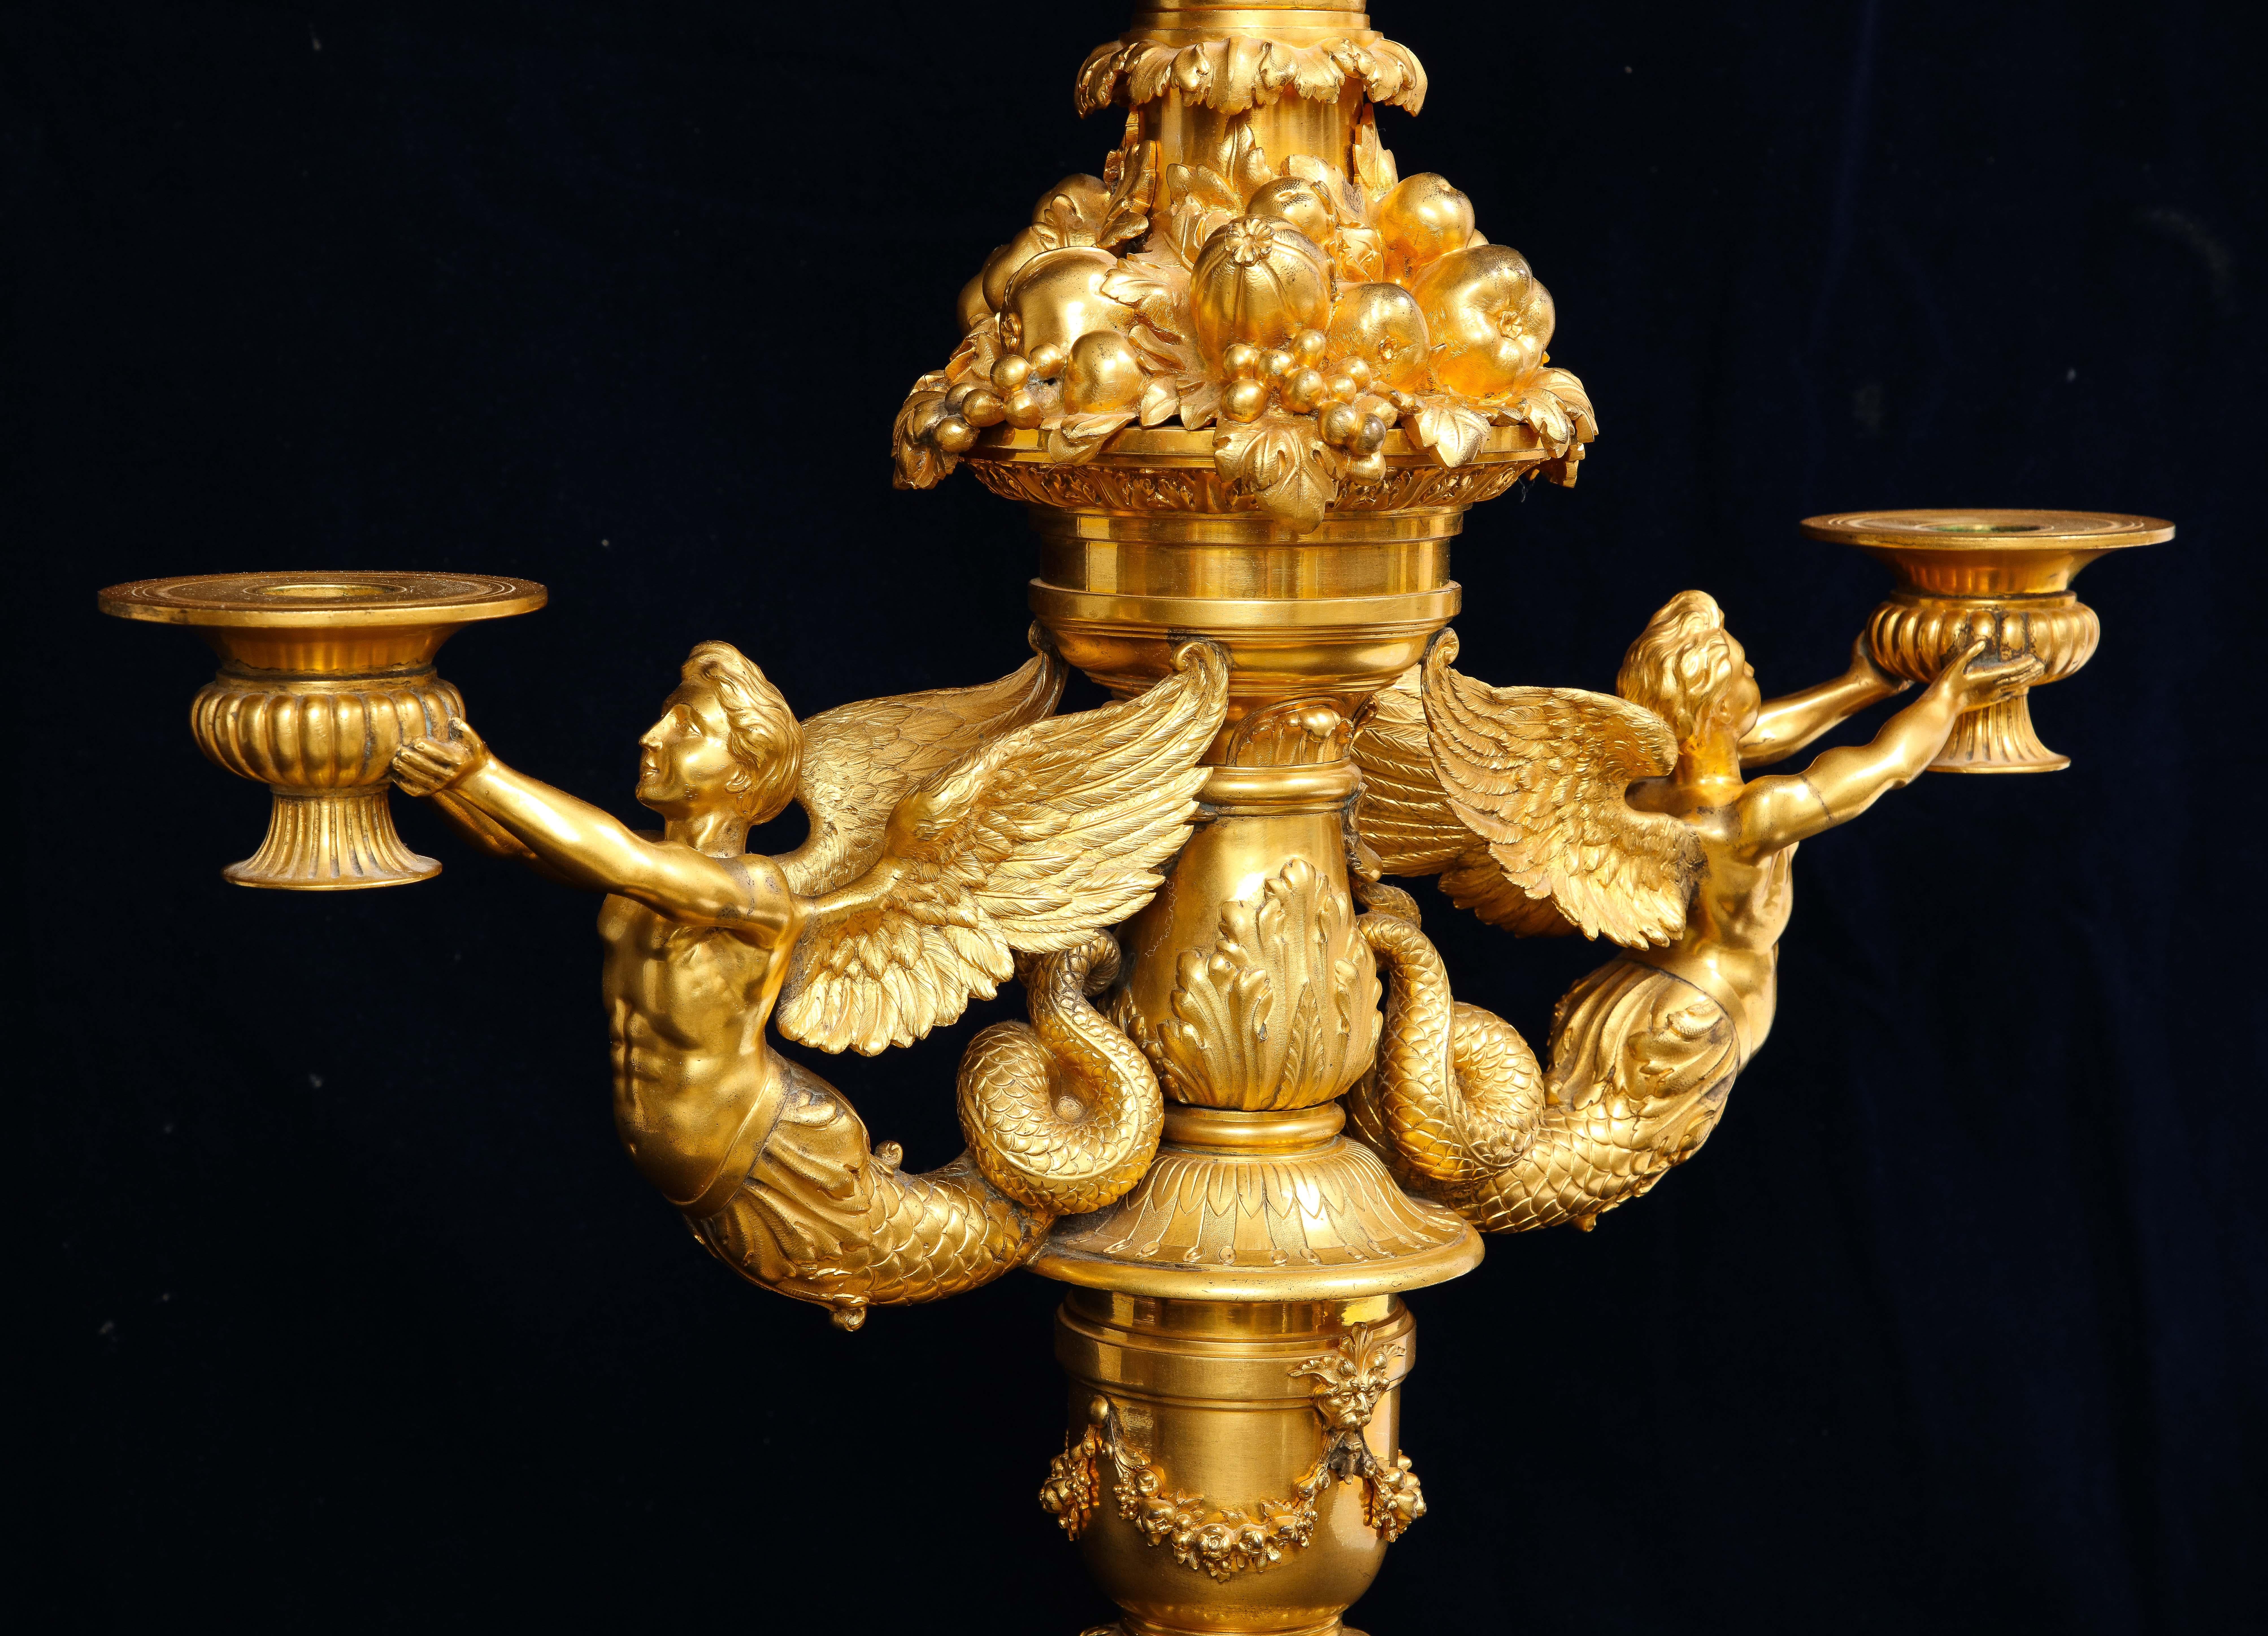 Marvelous Pair of 19th C. French Ormolu Four Arm Candelabras, Signed P. Canaux For Sale 6